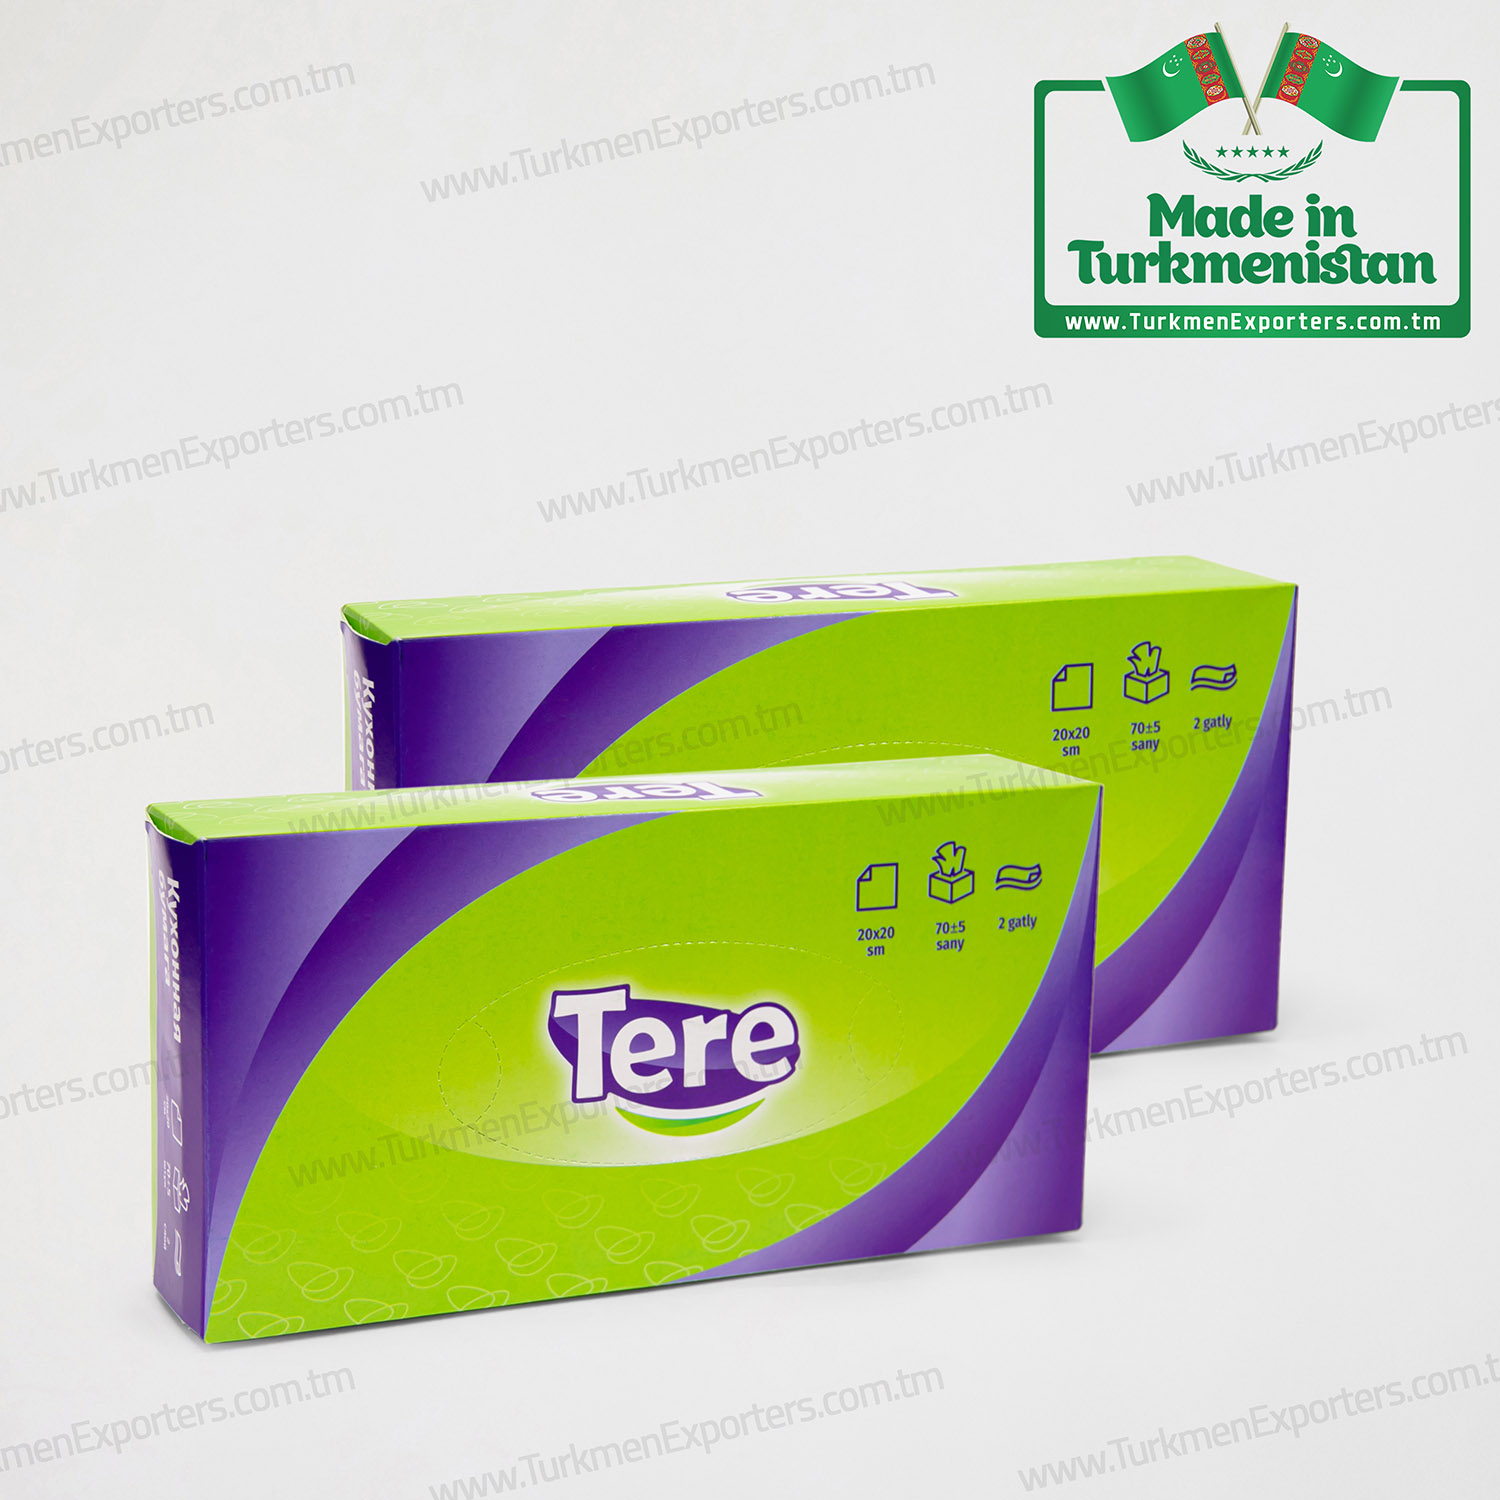 Tere paper napkins in a box | Tere paper factory